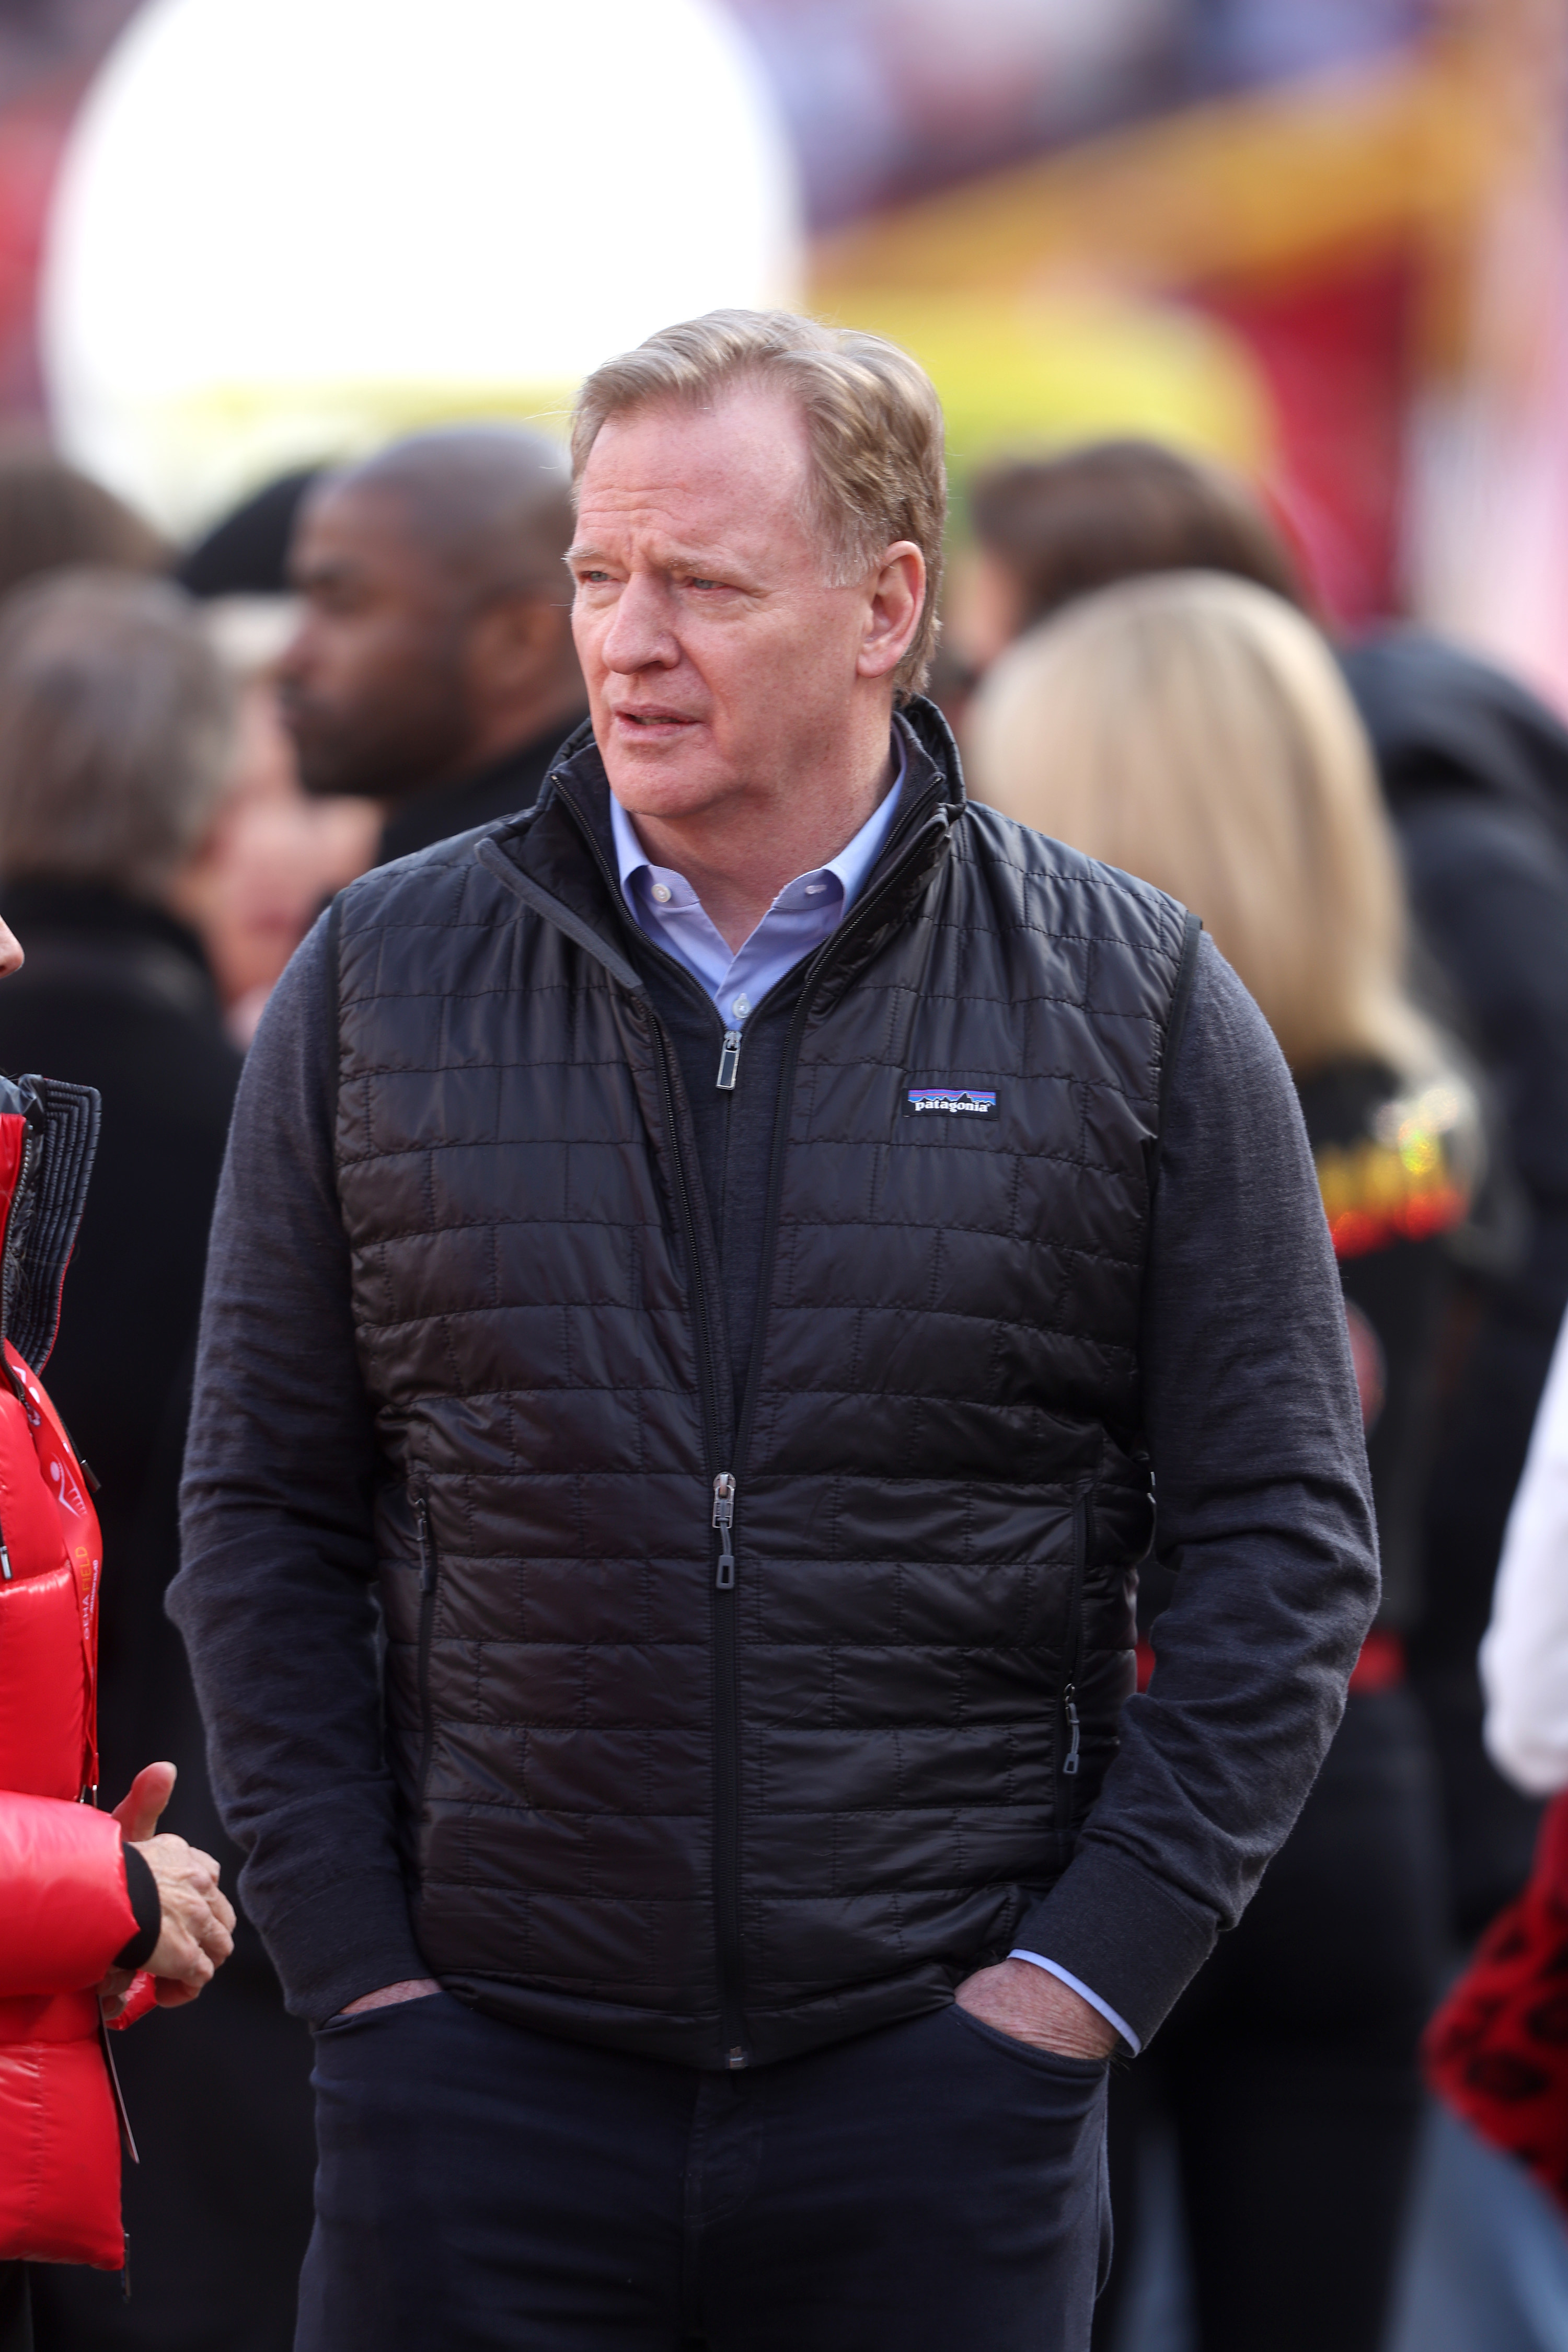 Roger Goodell at the AFC Championship game